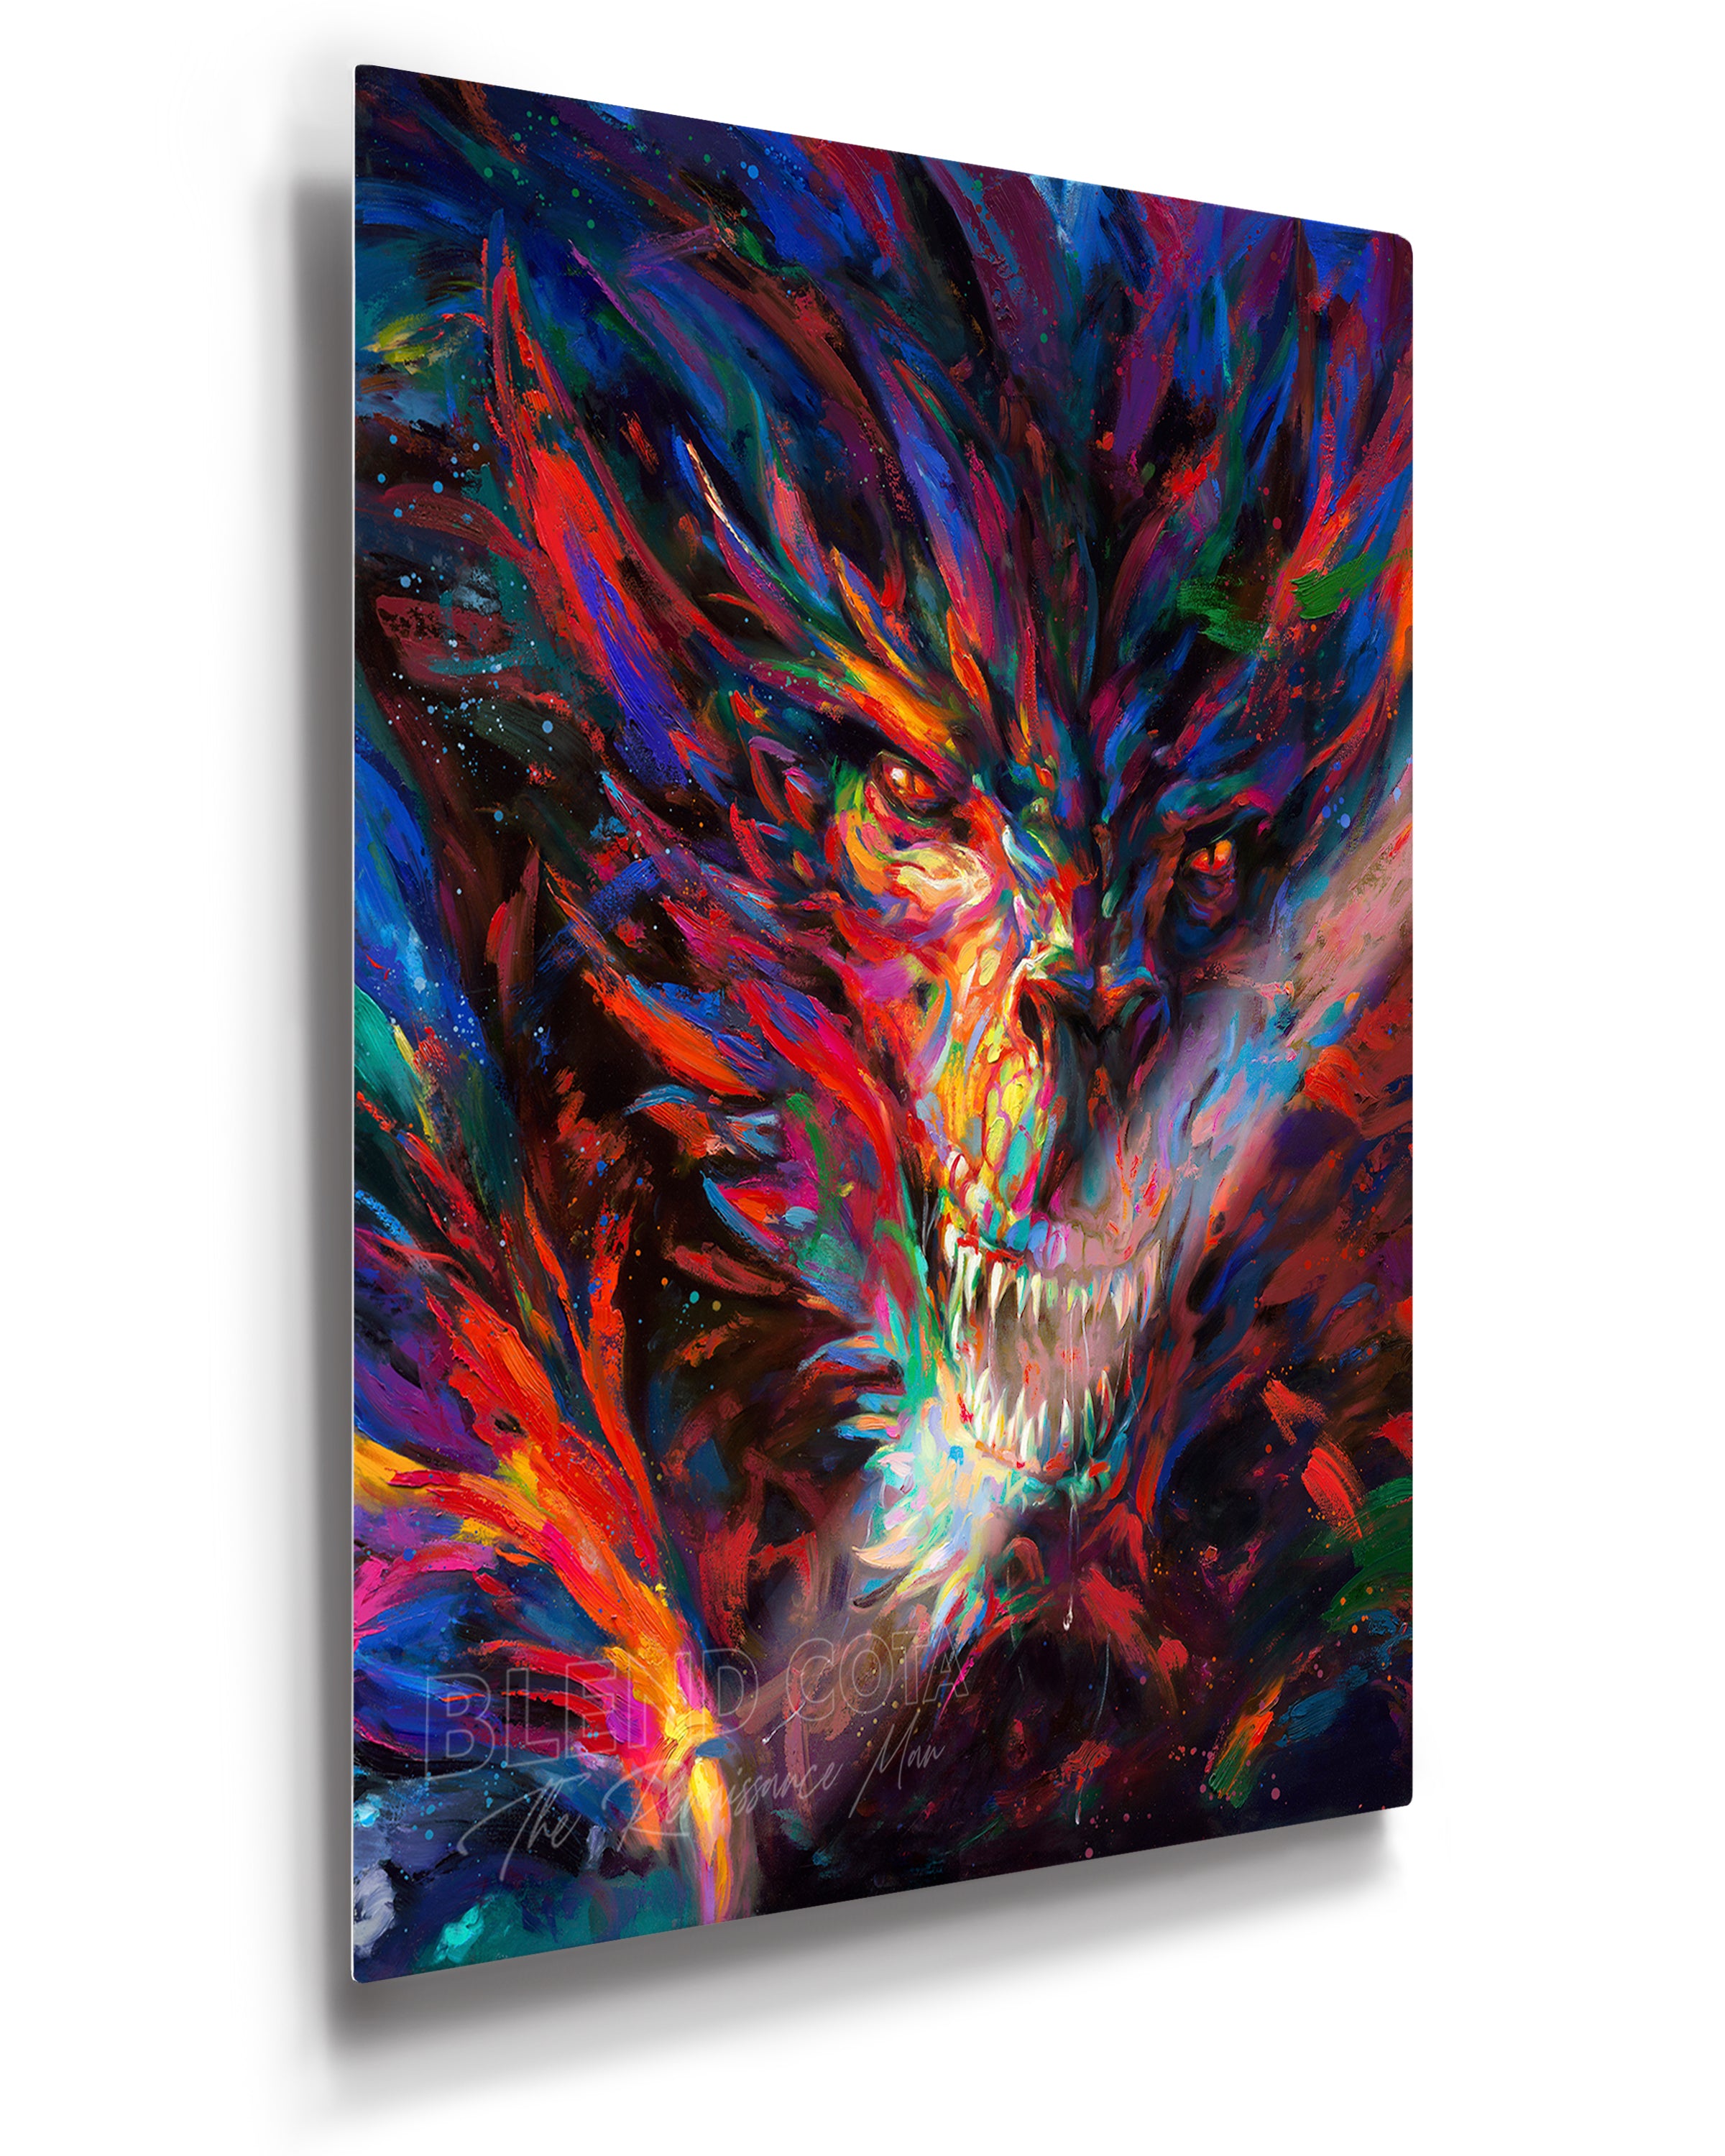 Limited edition print on metal of the dragon of war, legendary mythical being engulfed in red and blue flame, emerging from darkness with colorful brushstrokes in an expressionistic style.